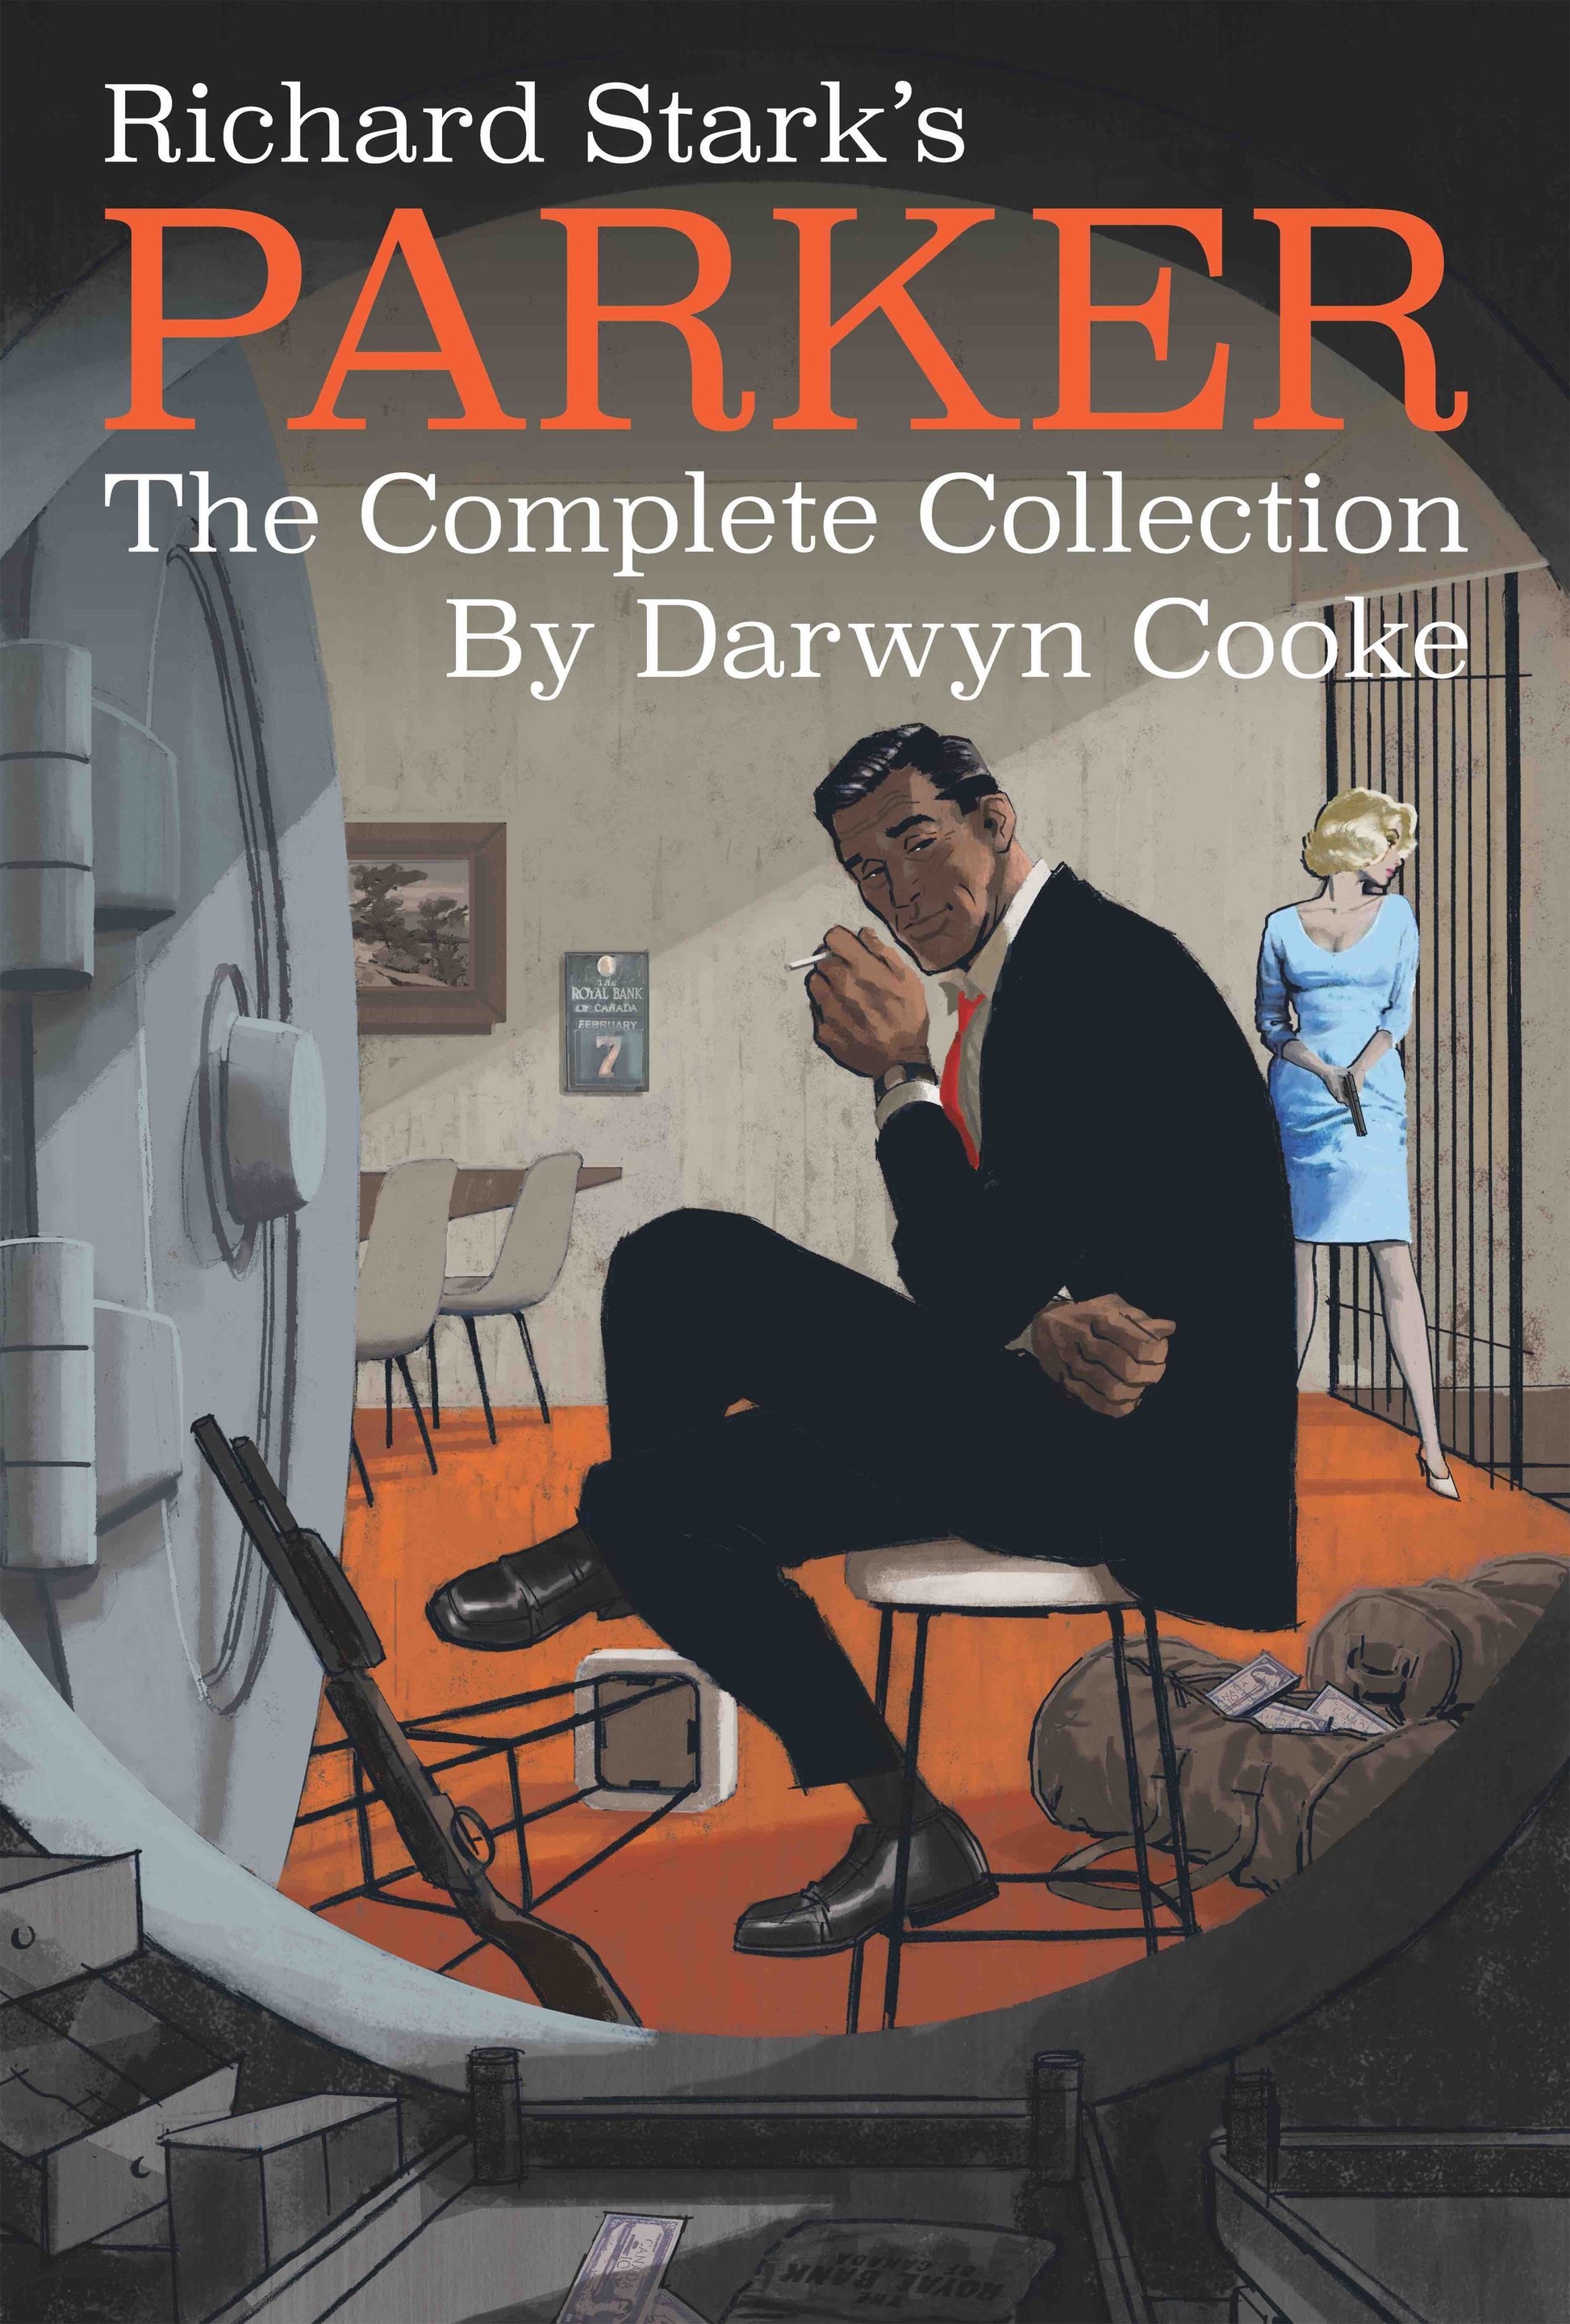 Richard Stark's Parker The Complete Collection (Paperback)